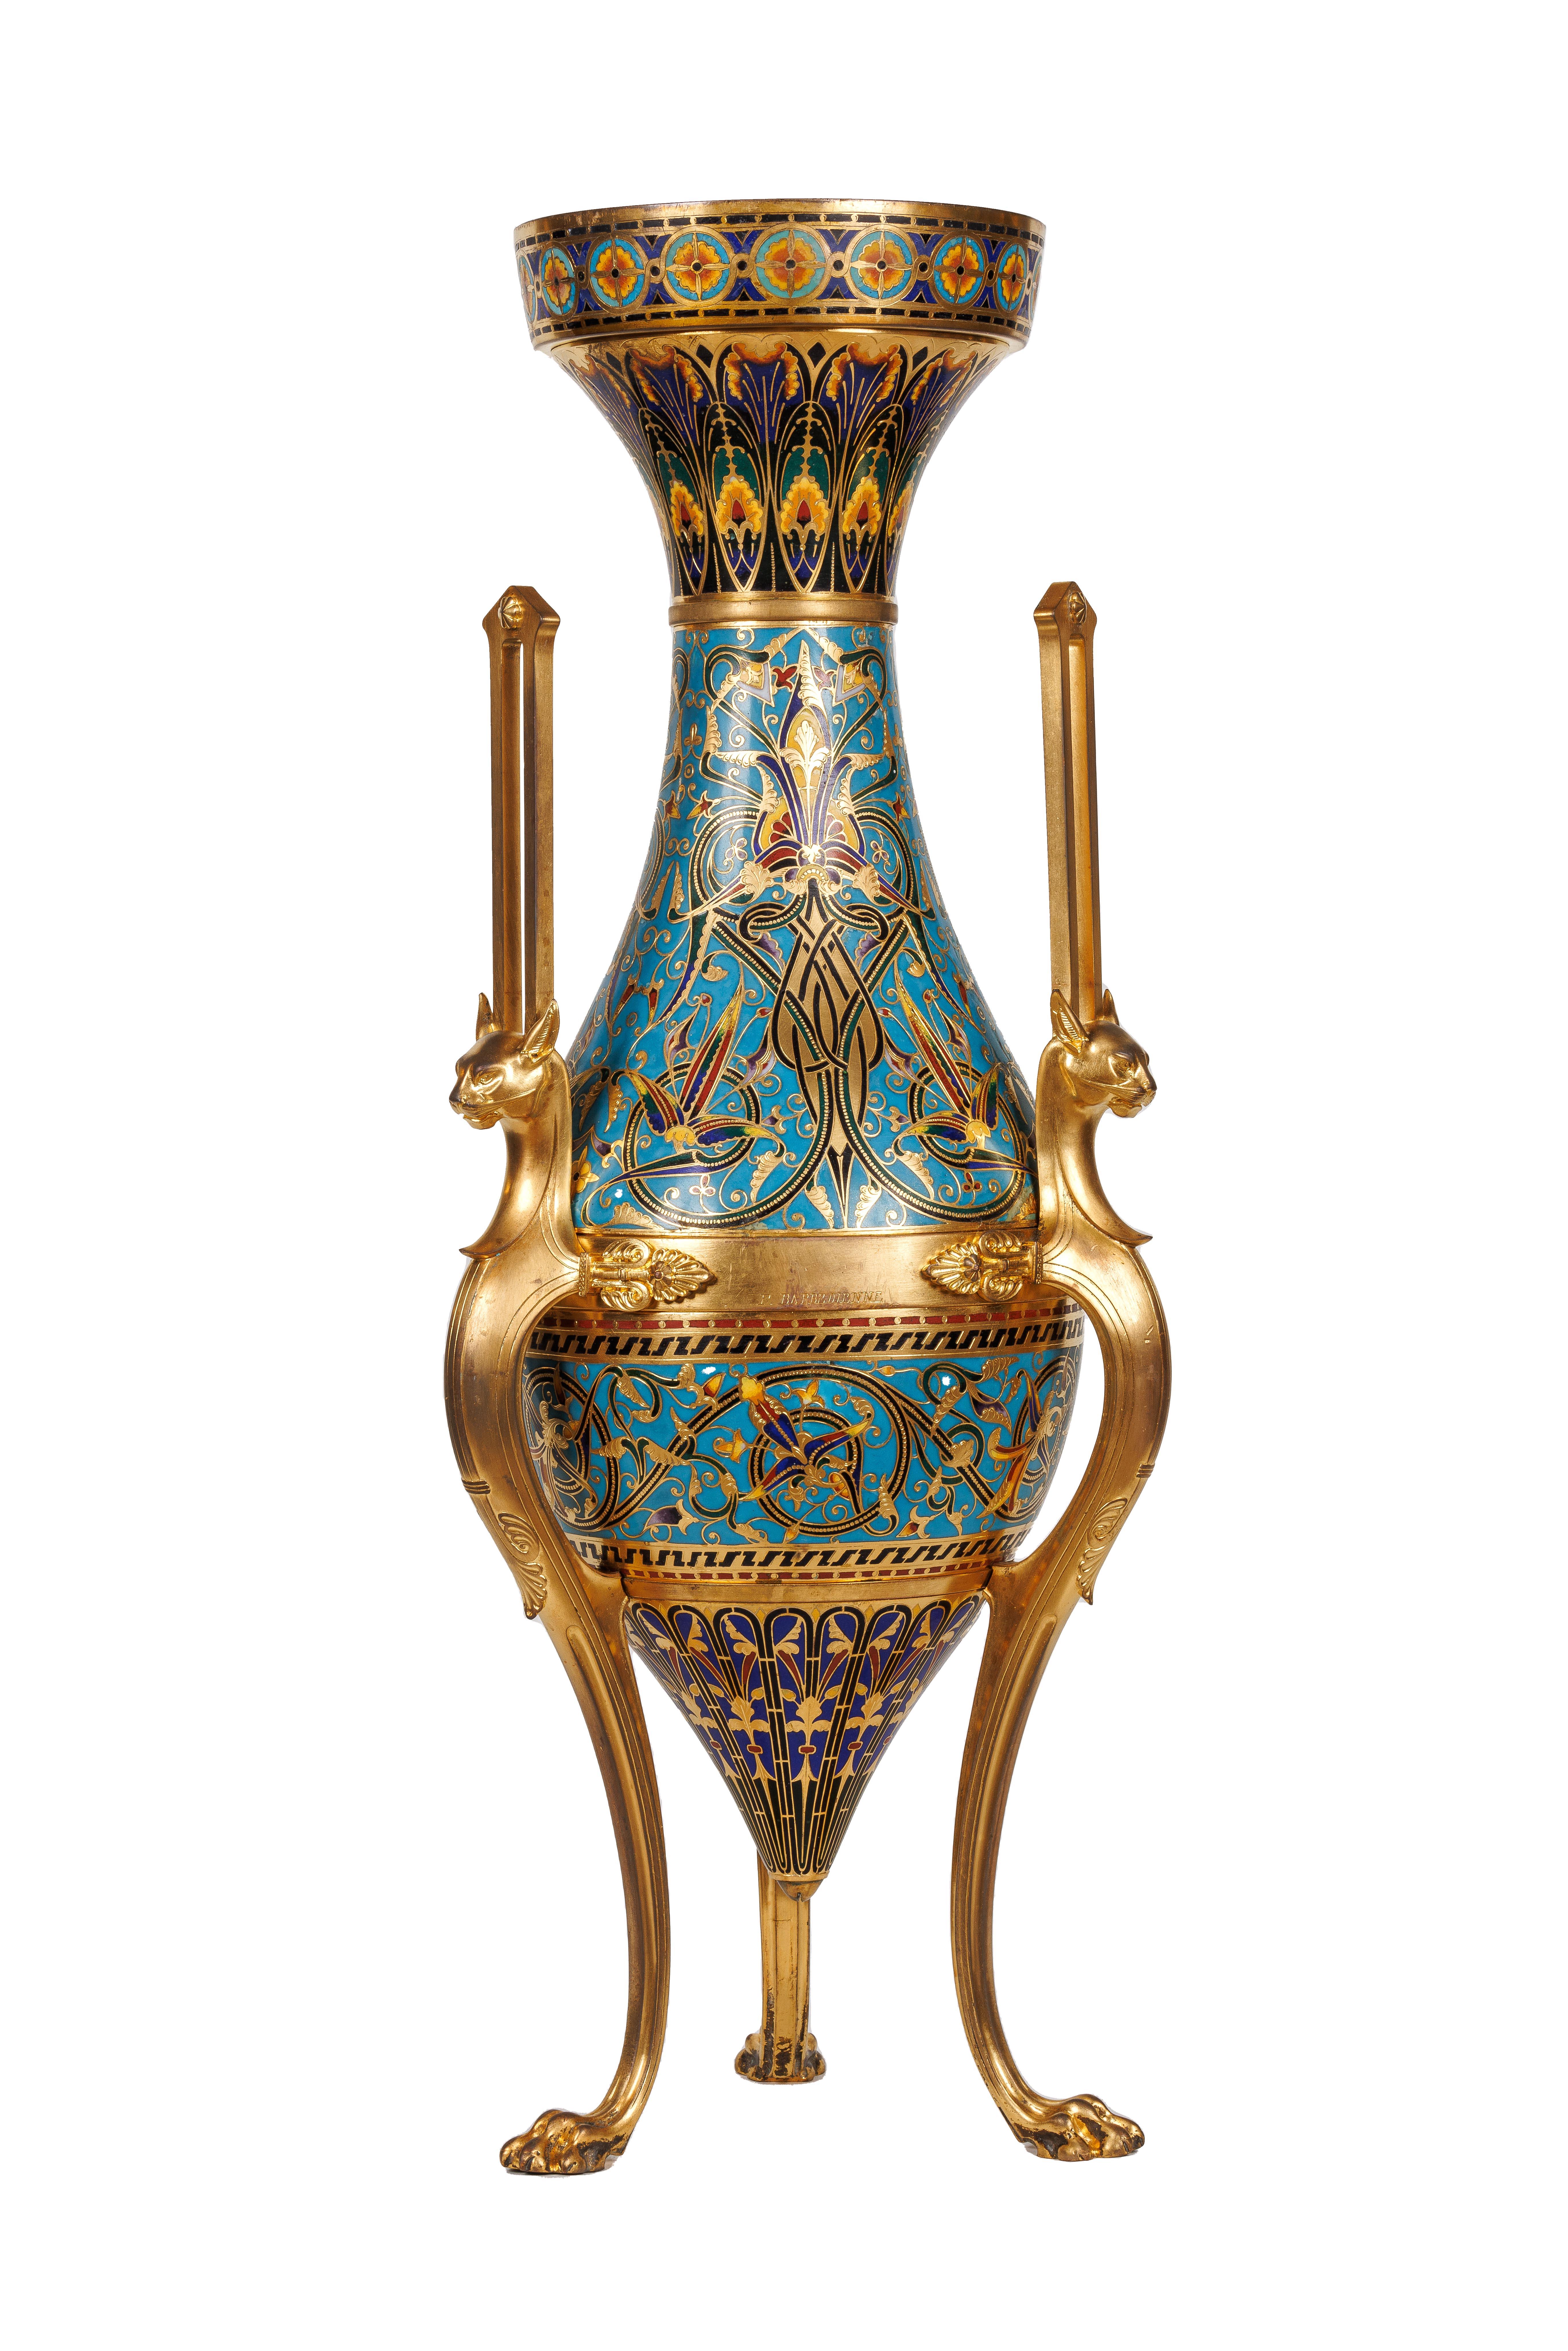 An exceptional pair of French Ormolu and Champleve Enamel vases by Louis Constant Sevin and Ferdinand Barbedienne, circa 1860.

